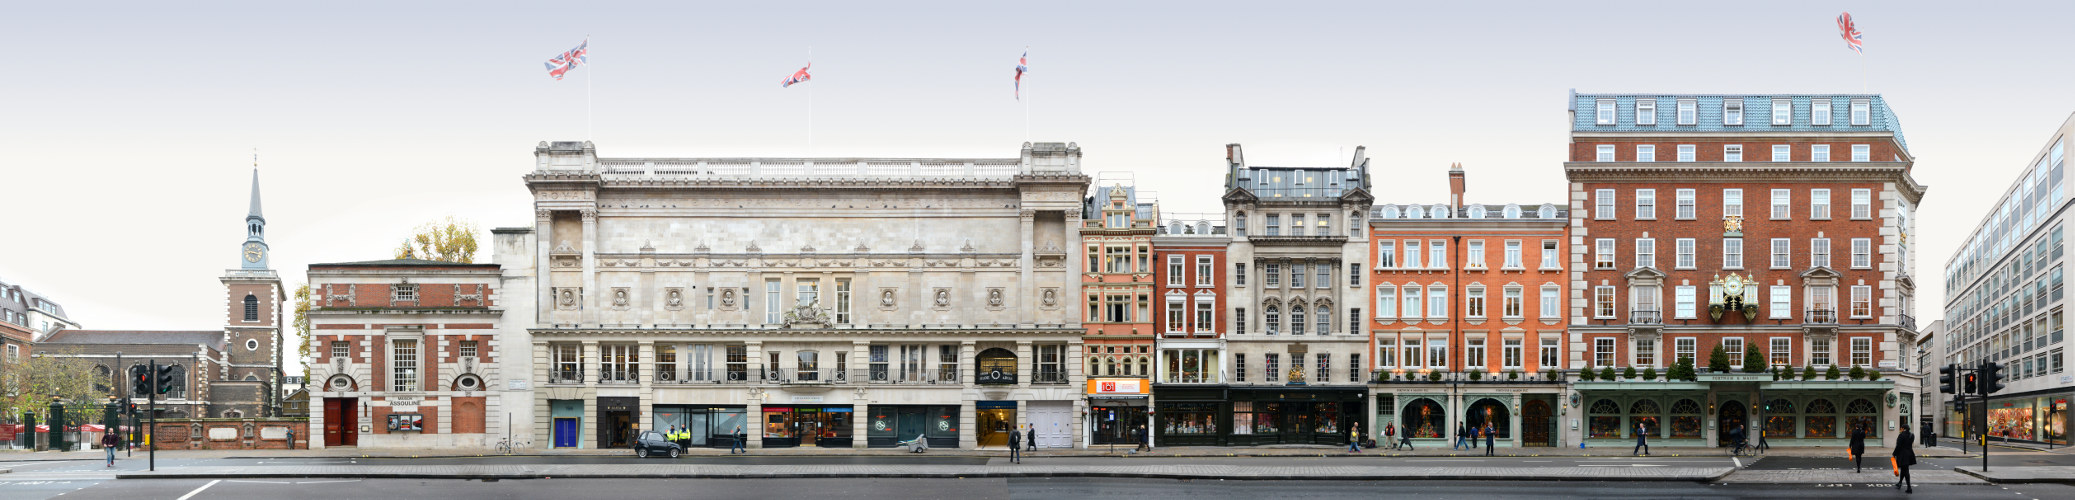 Piccadilly | Fortnum and Mason